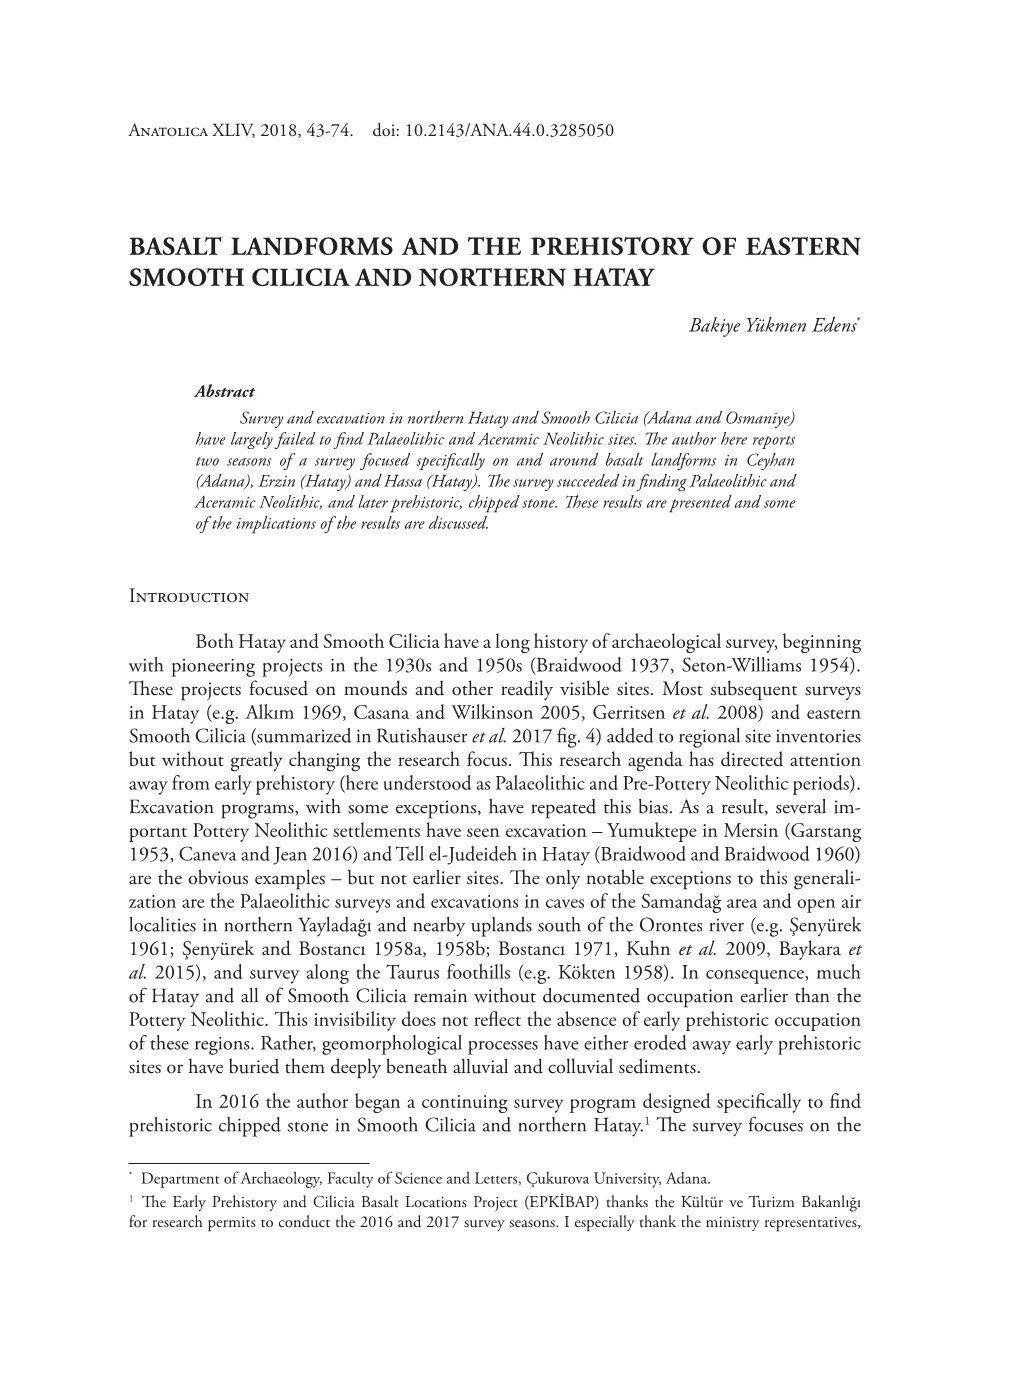 Basalt Landforms and the Prehistory of Eastern Smooth Cilicia and Northern Hatay